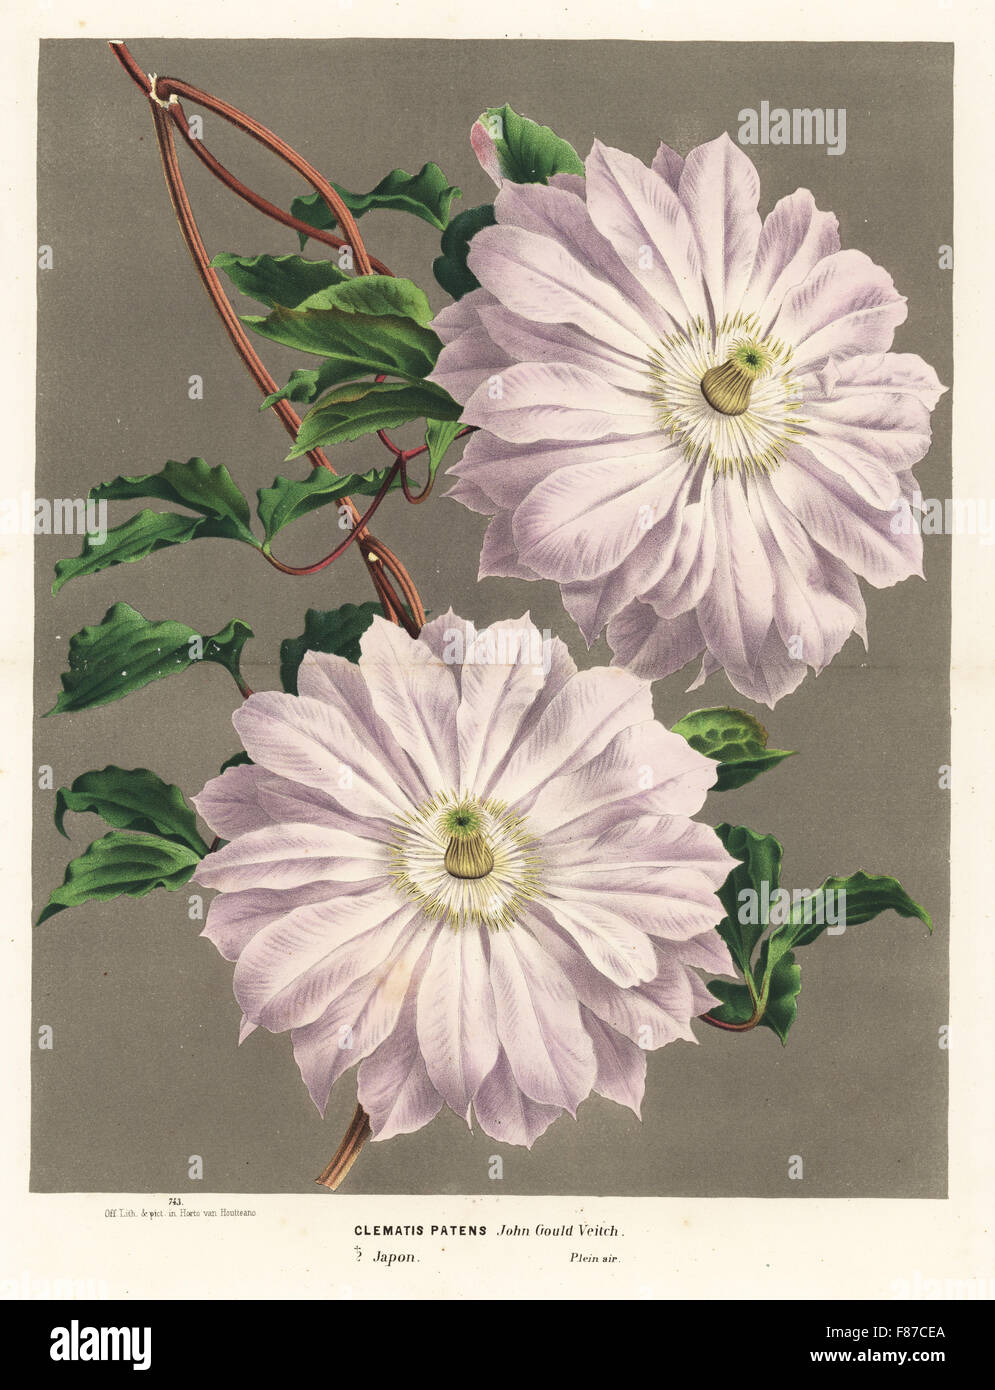 Large double clematis, John Gould Veitch, kazaguruma, Clematis patens. Collected in Japan in 1862 by Robert Fortune. Handcoloured lithograph from Louis van Houtte and Charles Lemaire's Flowers of the Gardens and Hothouses of Europe, Flore des Serres et des Jardins de l'Europe, Ghent, Belgium, 1870. Stock Photo